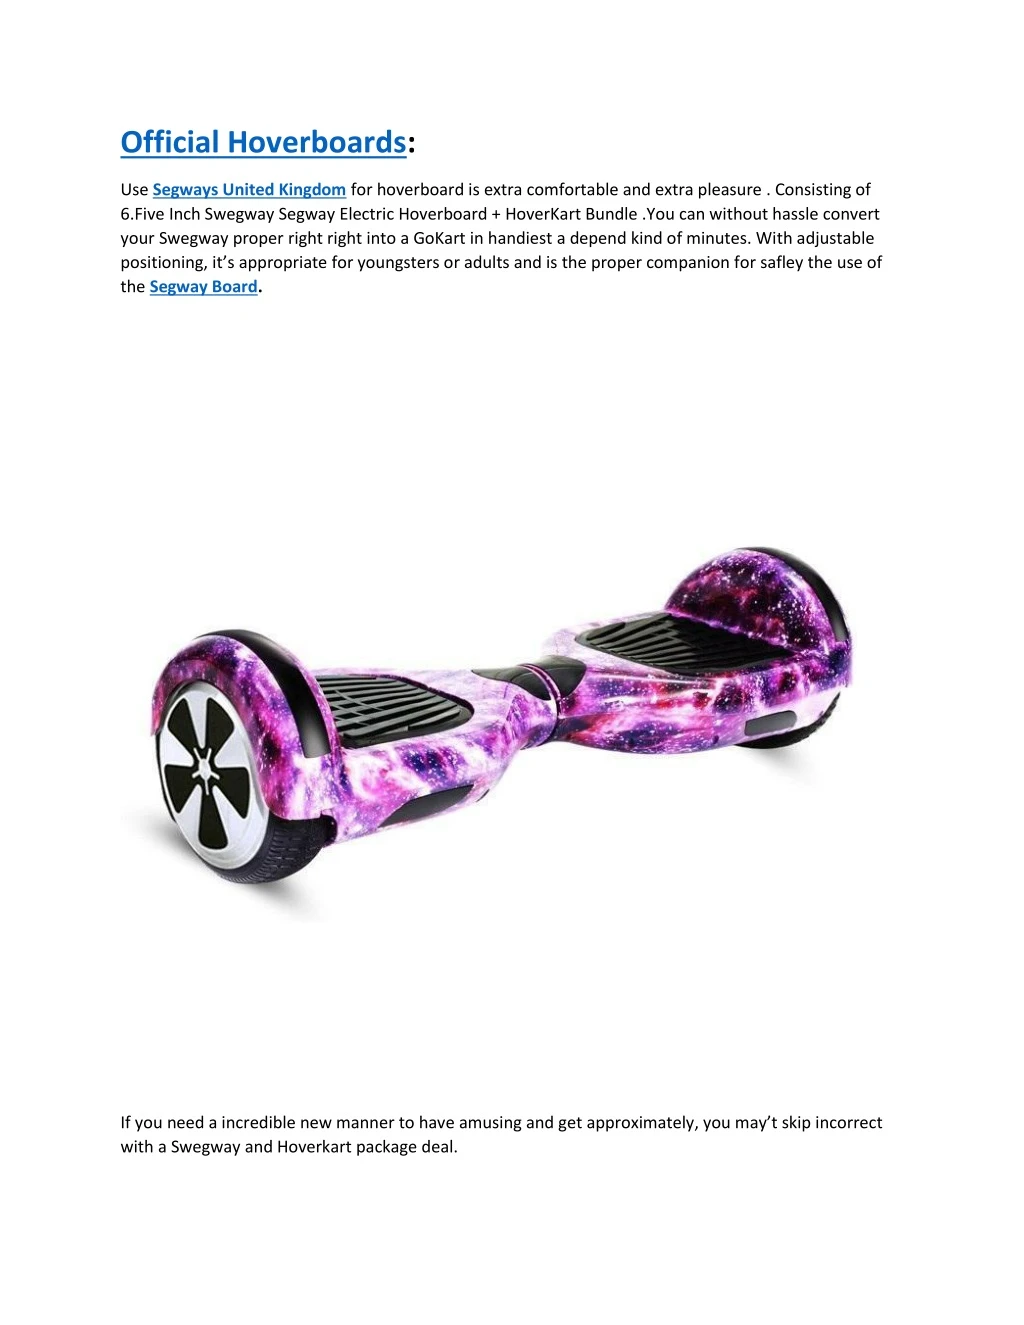 official hoverboards